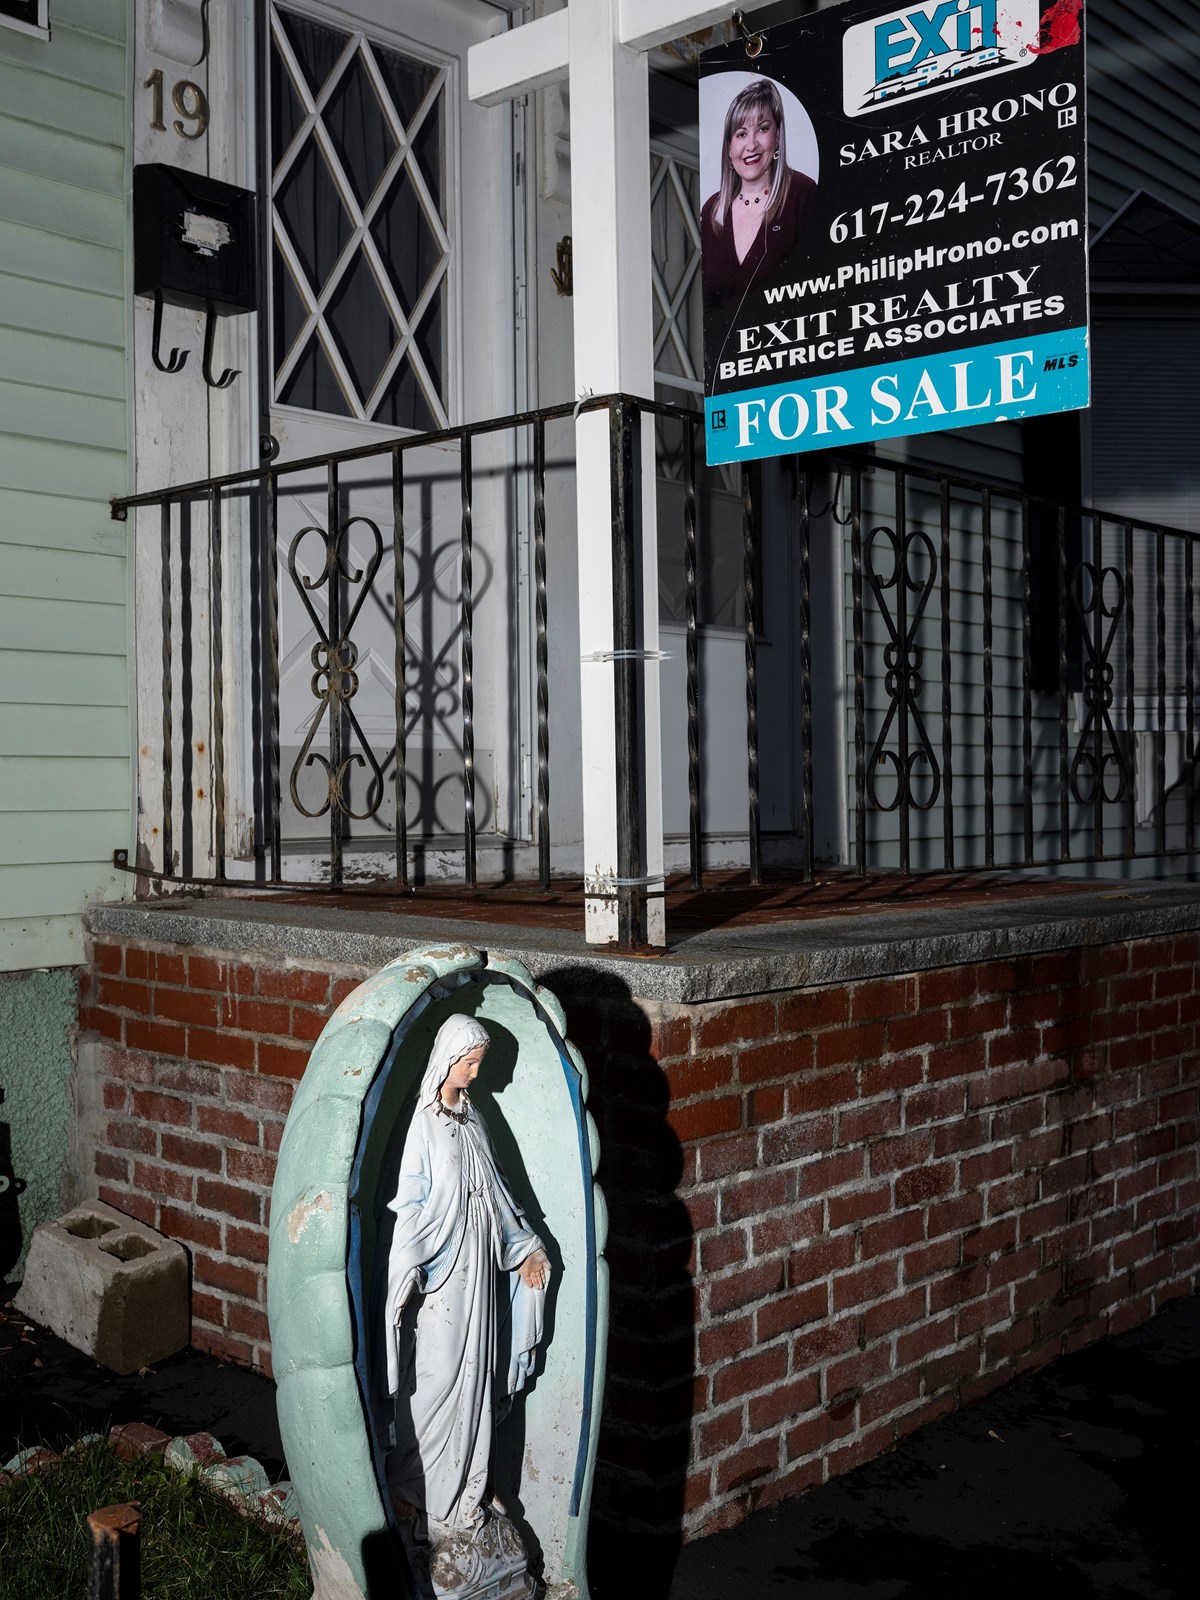 Picture of the outside / entrance to Lowell home with a for sale sign and the realtor's information as well as a statue of Mary.